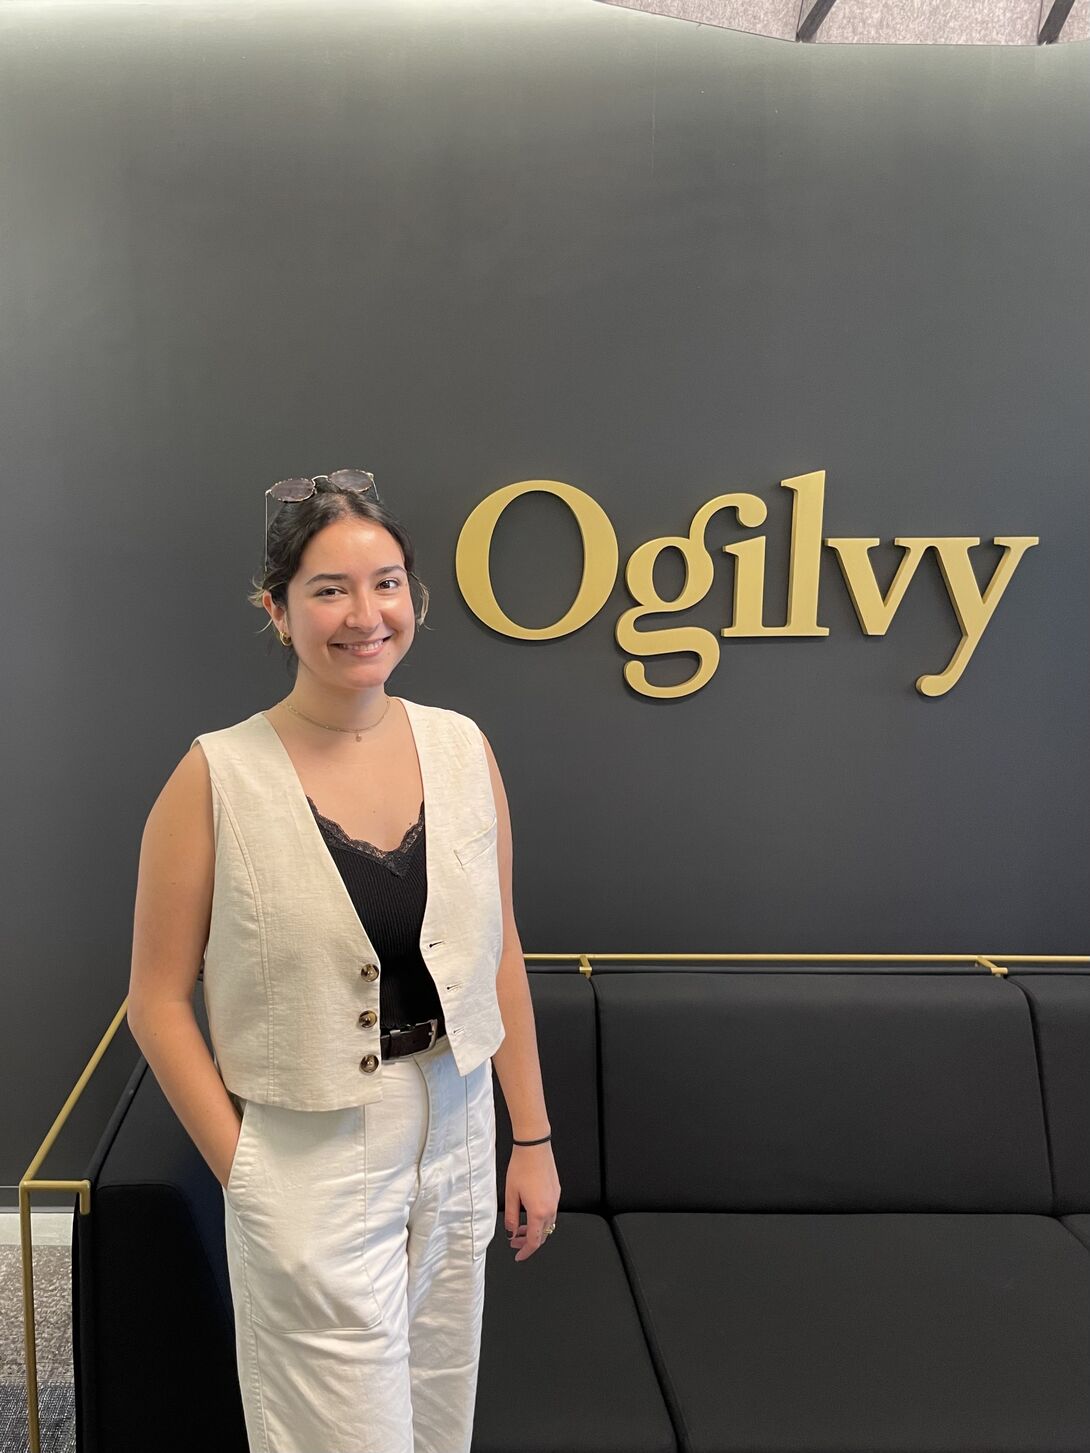 A woman stands wearing a cropped white vest and white pants poses in front of a sign that says "Ogilvy"